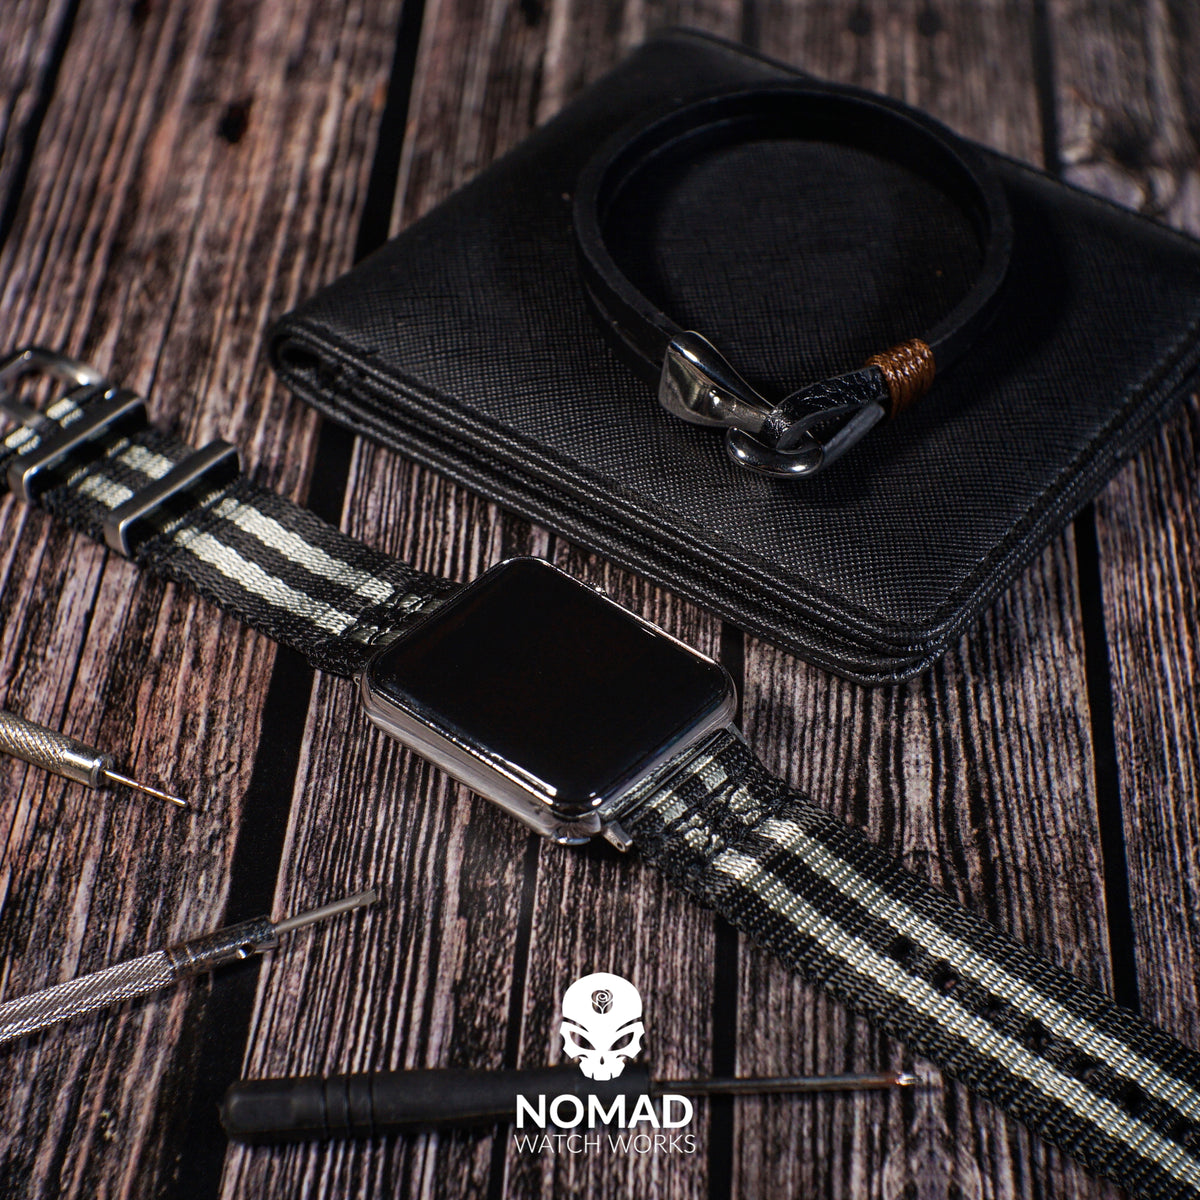 Lincoln Leather Bracelet in Black (Size M) - Nomad watch Works